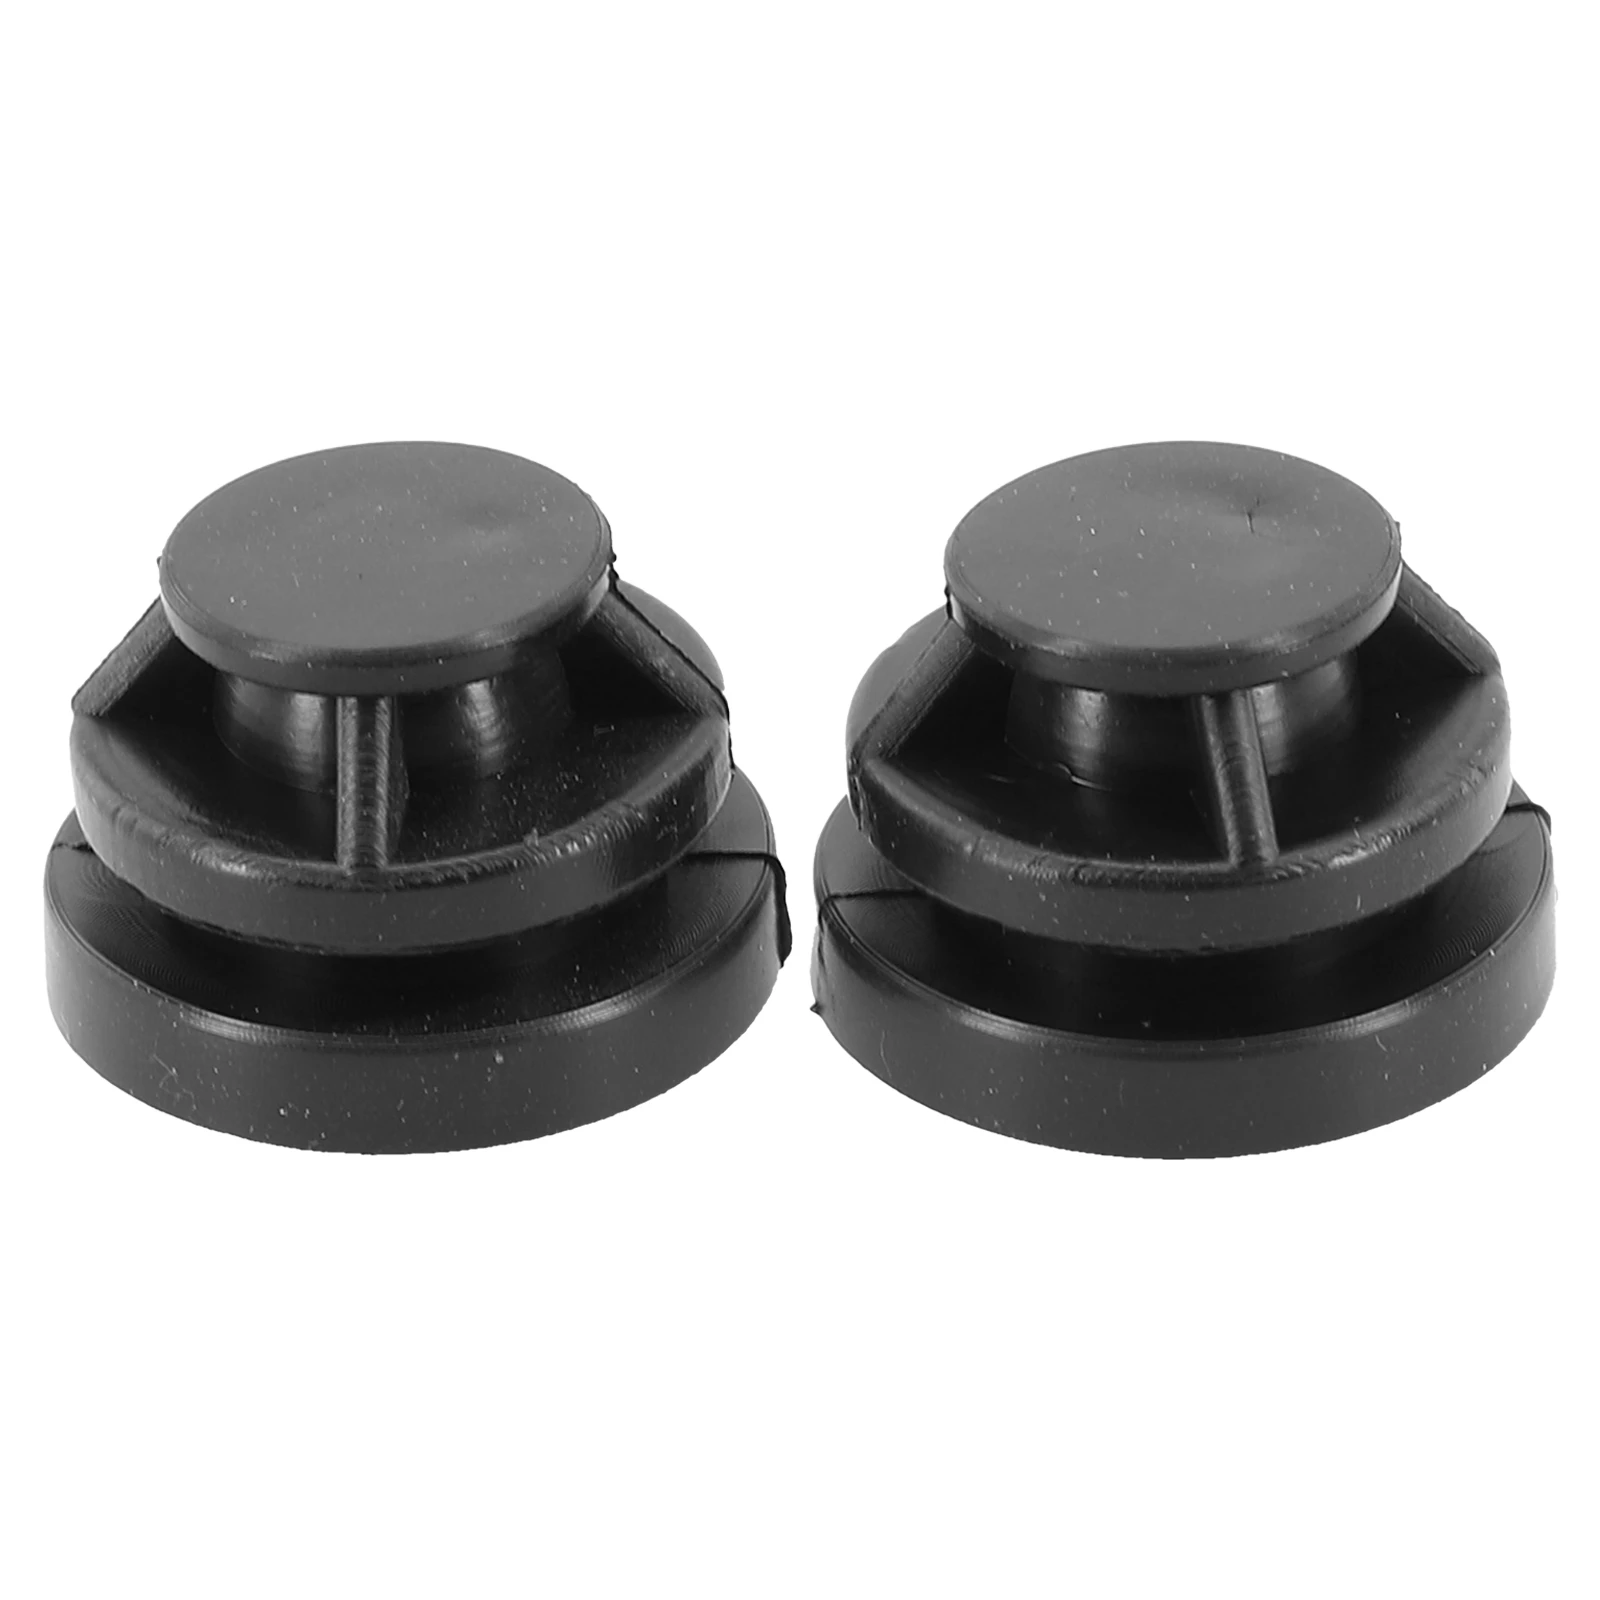 

Car Accessories Engine Cover Mounts For Mazda CX-9 TC 2016 - 2021 P30110238 Rubber Car Engine Cover Rubber Mount